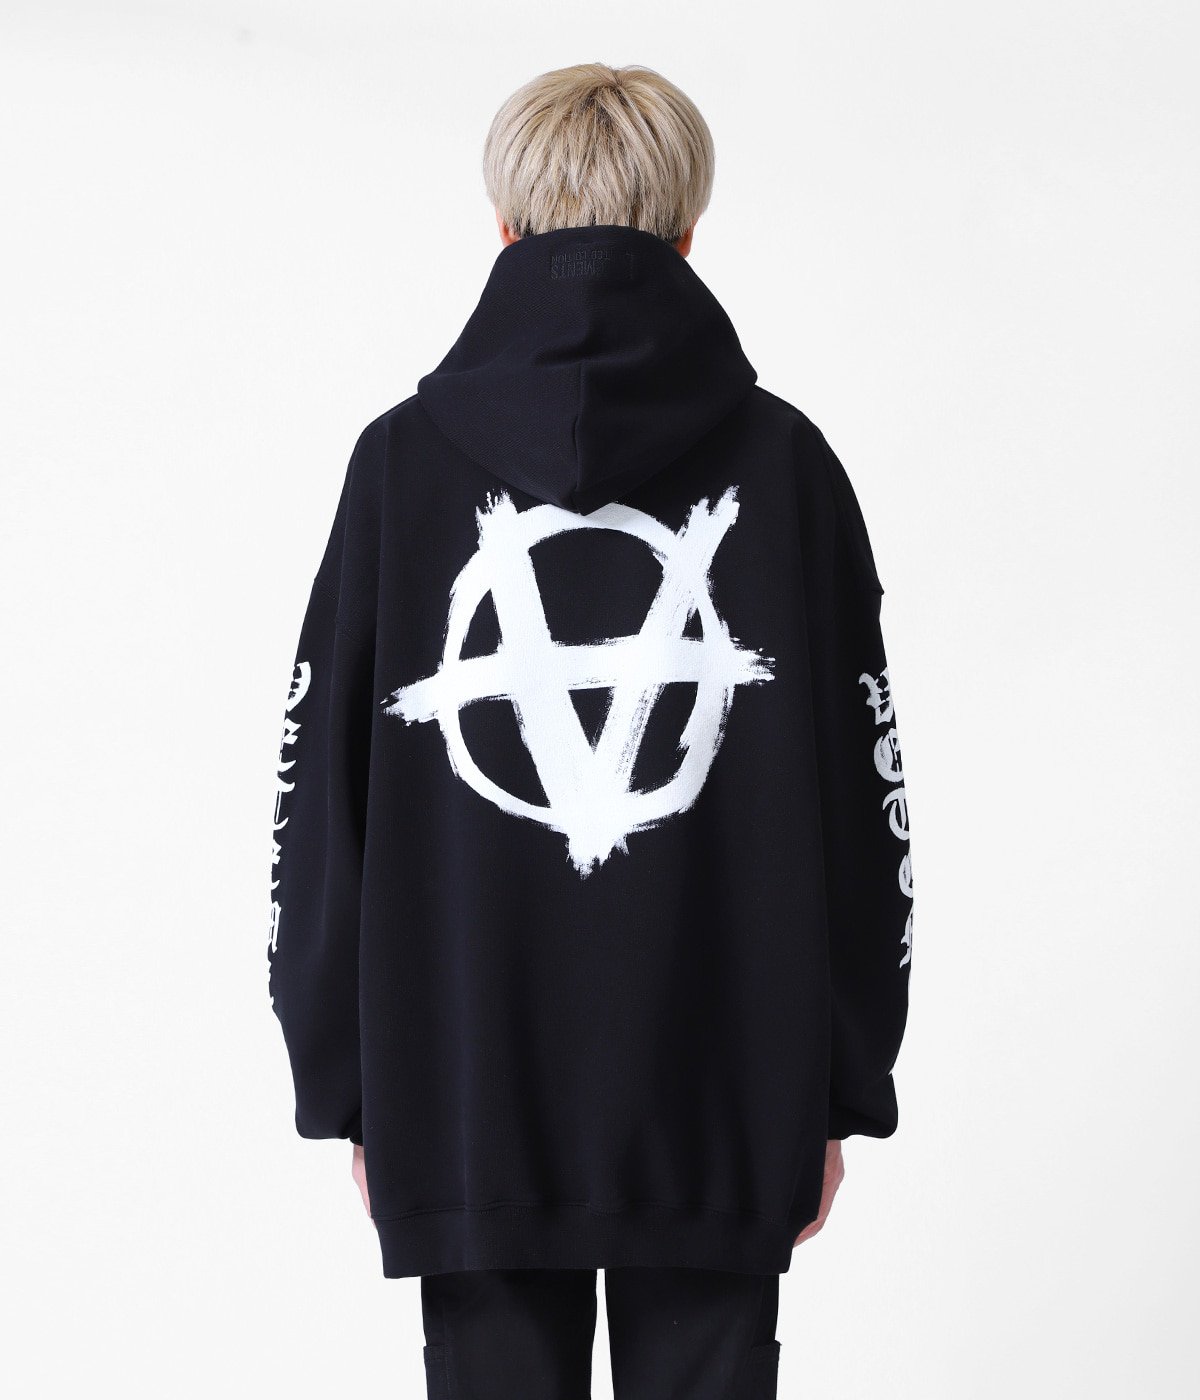 DOUBLE ANARCHY LOGO HOODIE